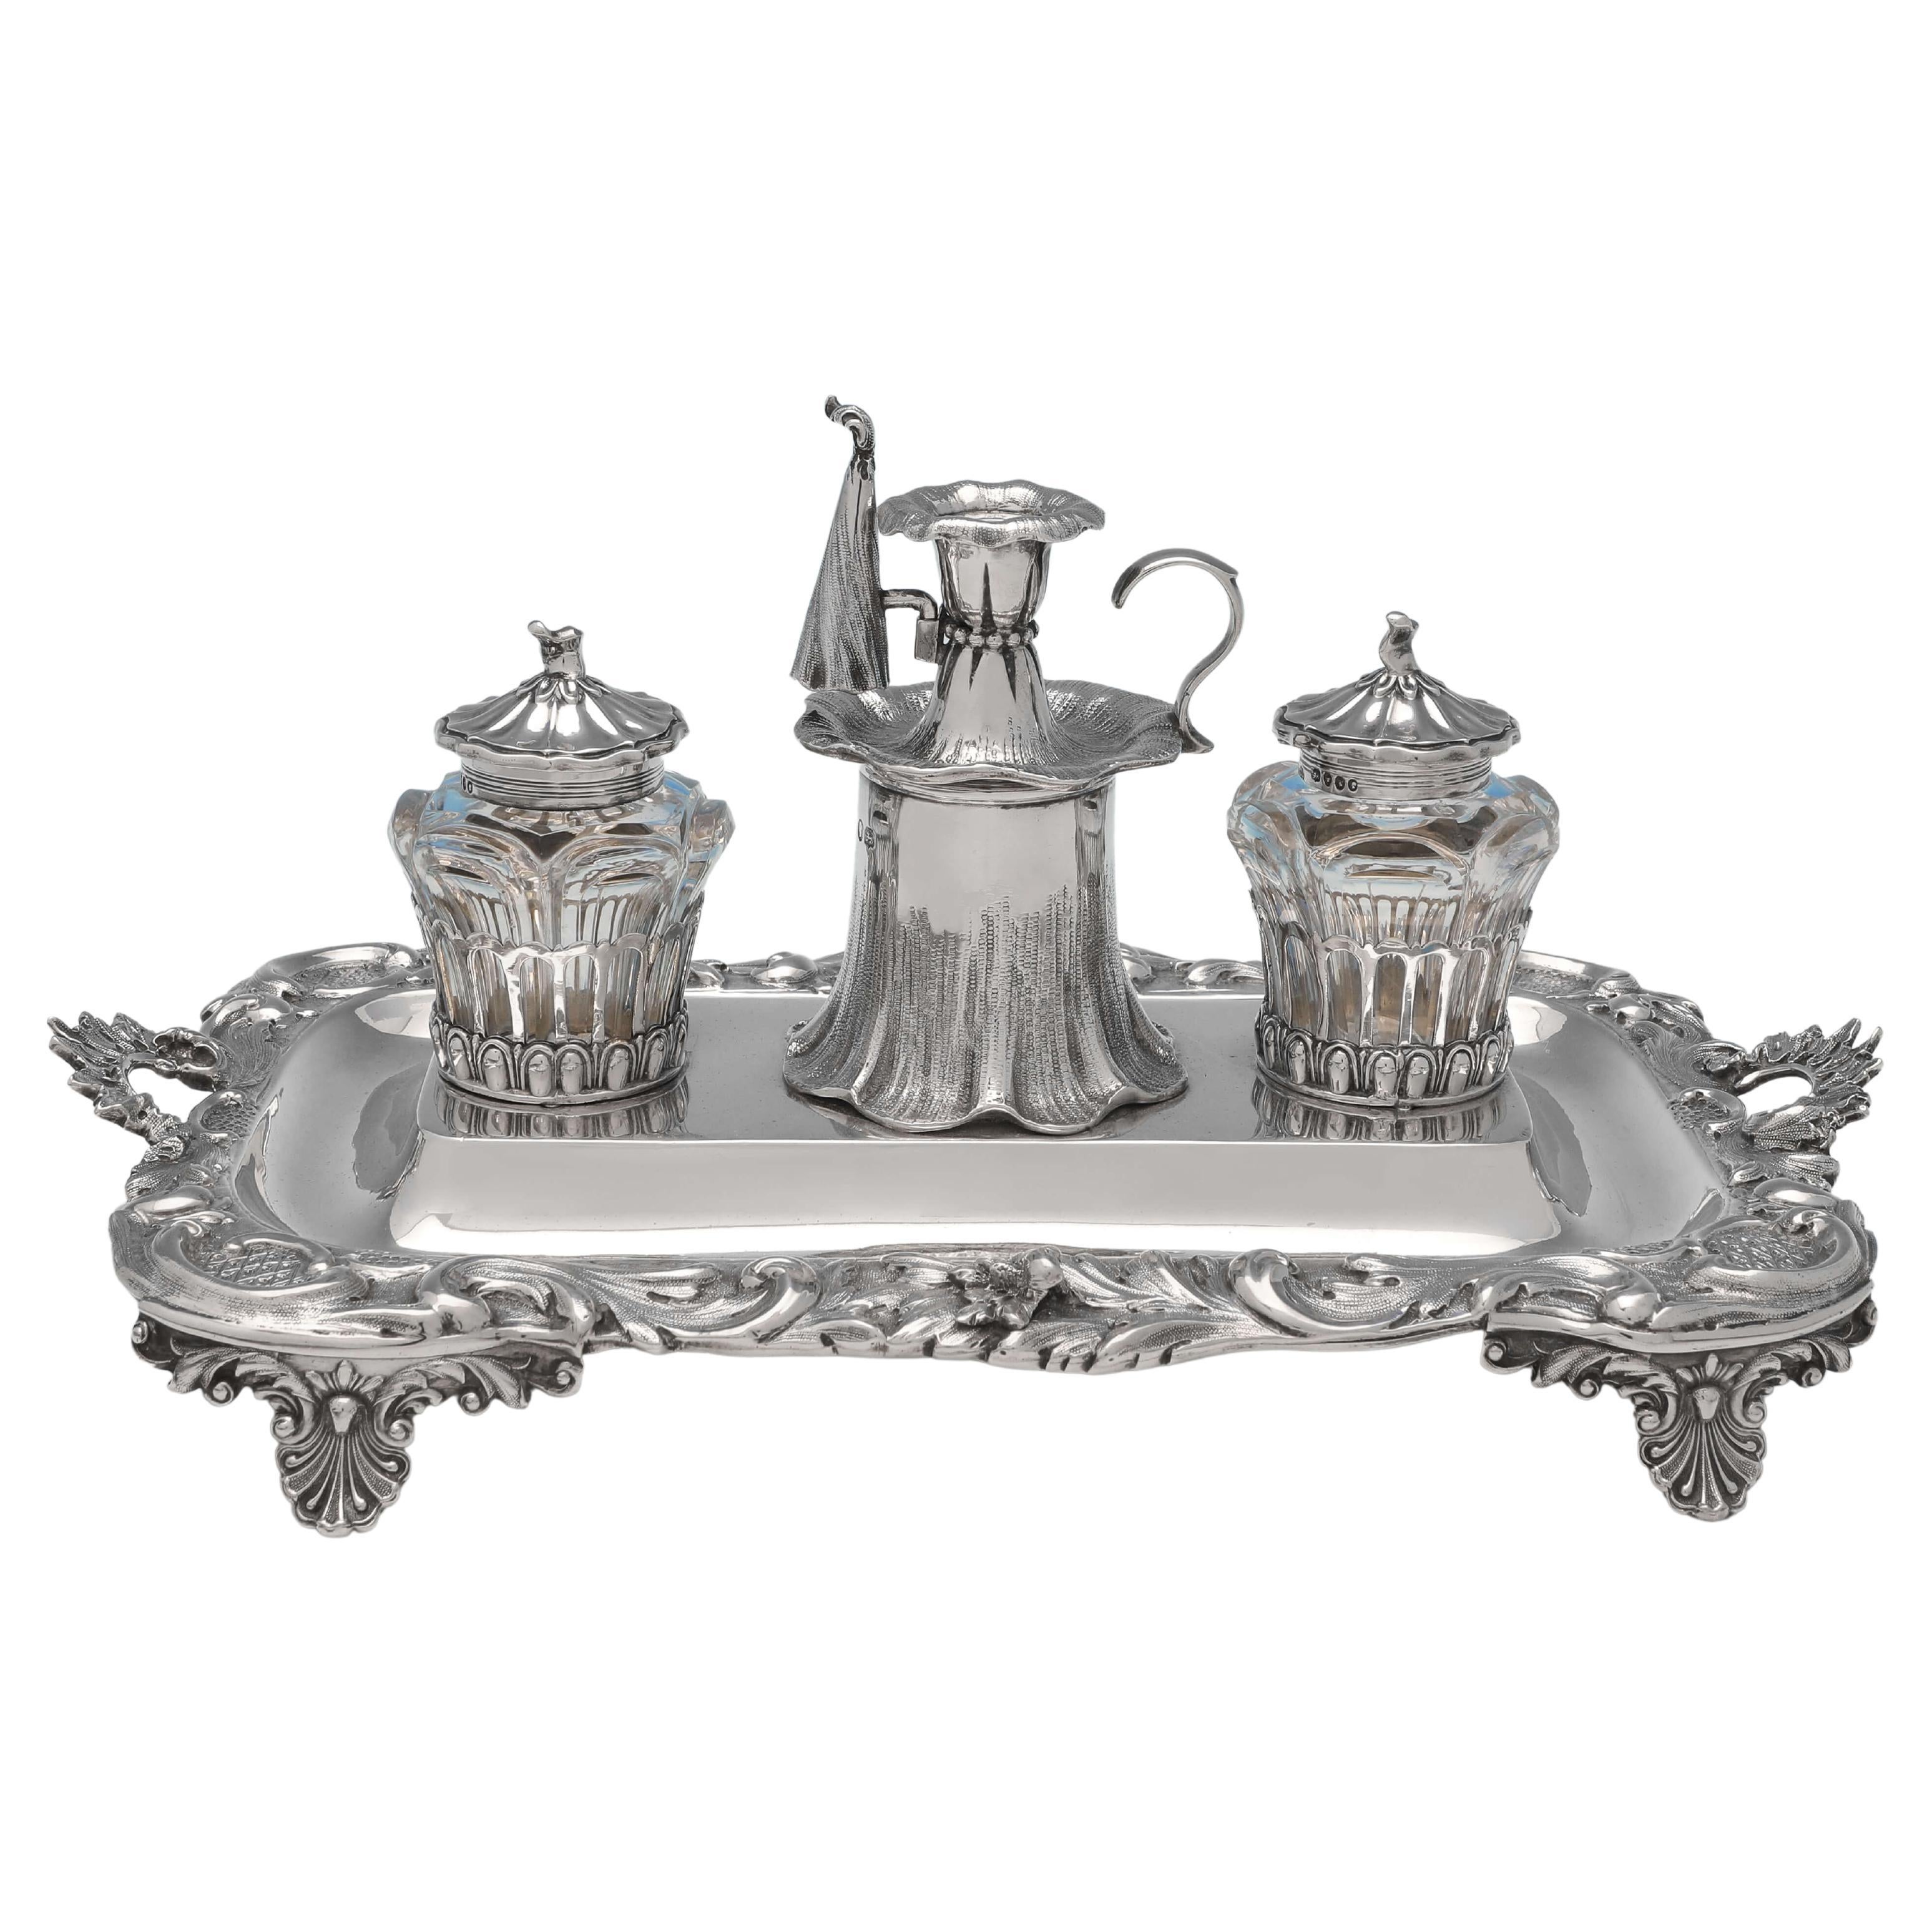 Naturalistic Victorian Sterling Silver Ink Stand, Charles & George Fox, 1846